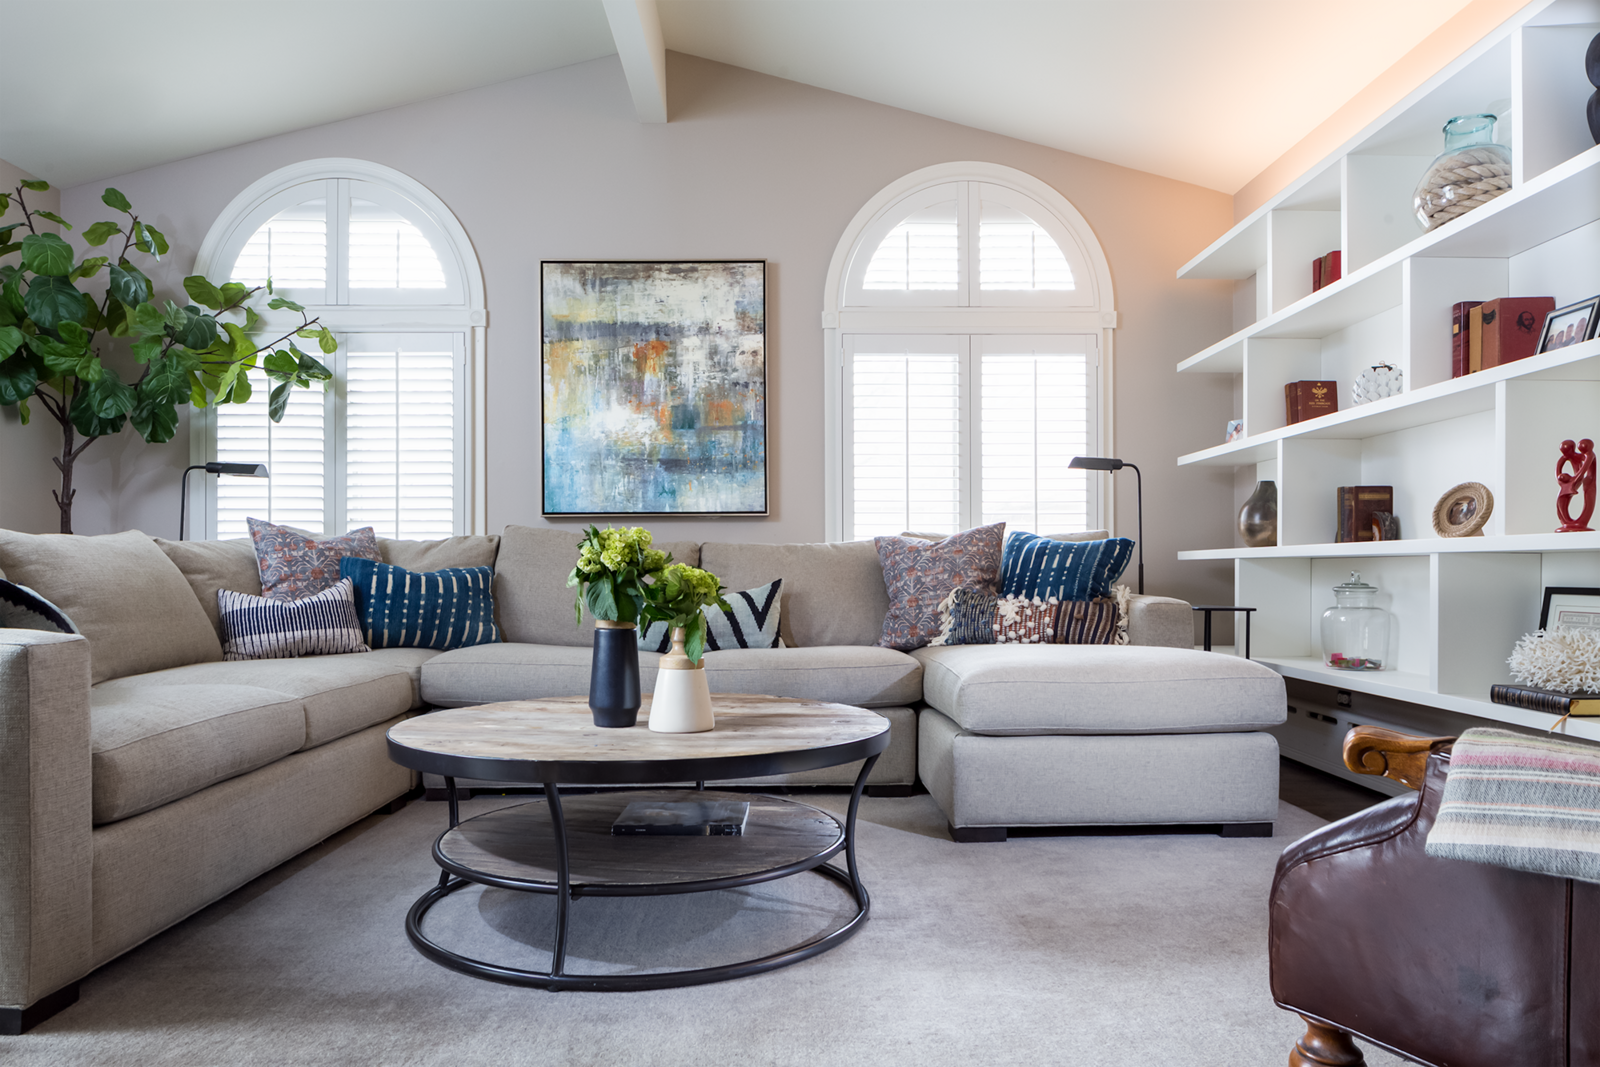 Neutral decorated living room with white built in shelves